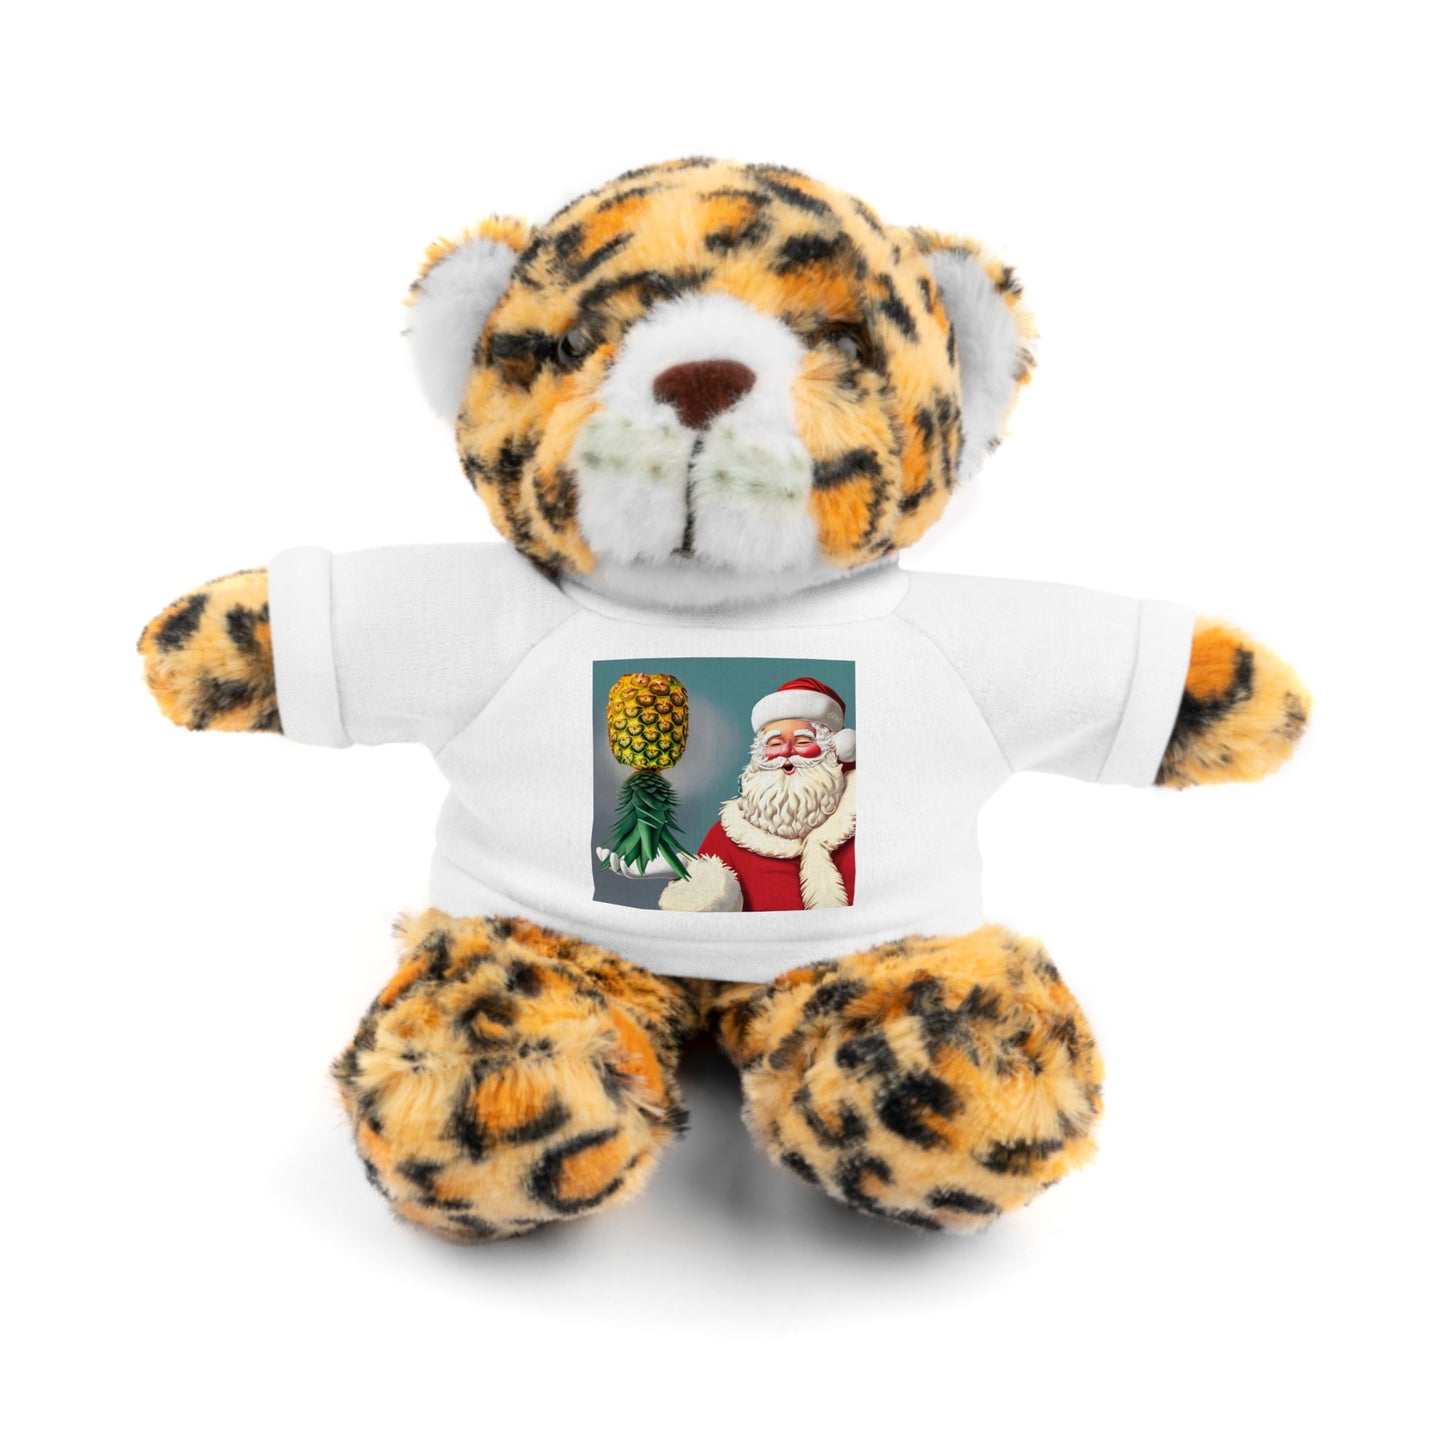 Upside Down Pineapple Santa Claus Christmas Swinger Stuffed Animals with Tee, If You Know You Know, Adult Party Gift